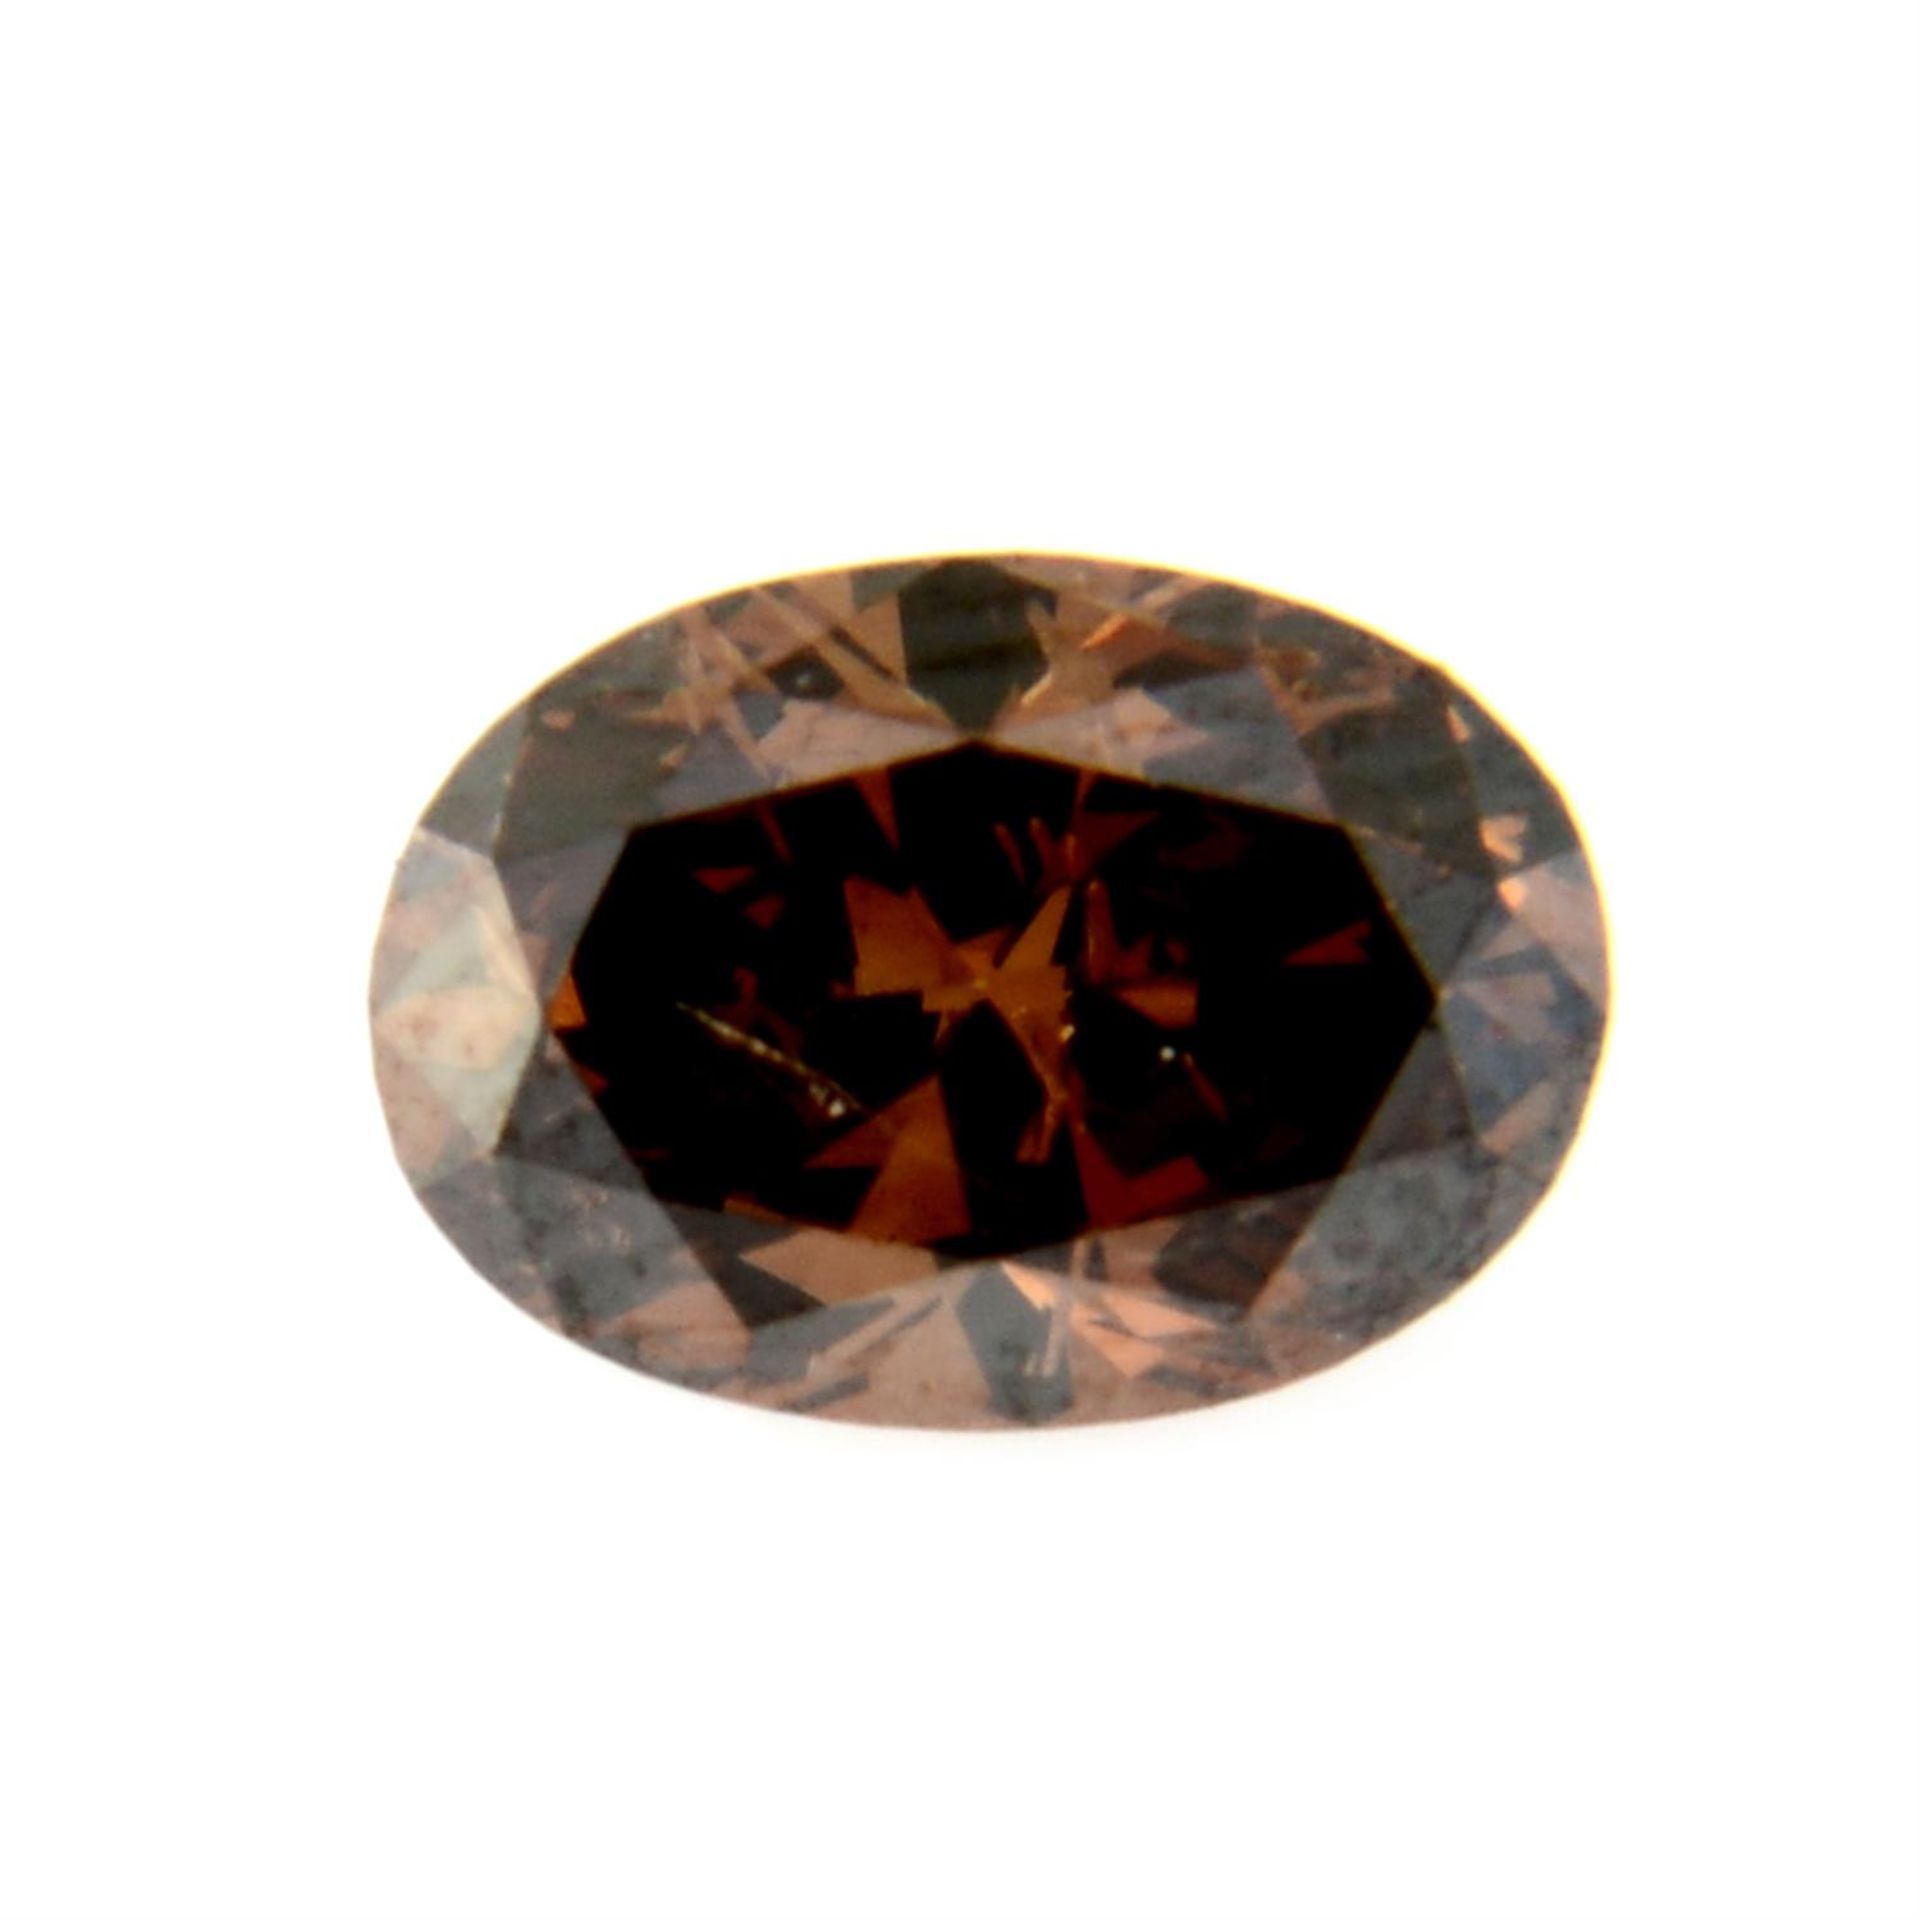 An oval shape 'brown' diamond, weighing 1.03ct. Estimated to be 'brown' colour and I1 clarity